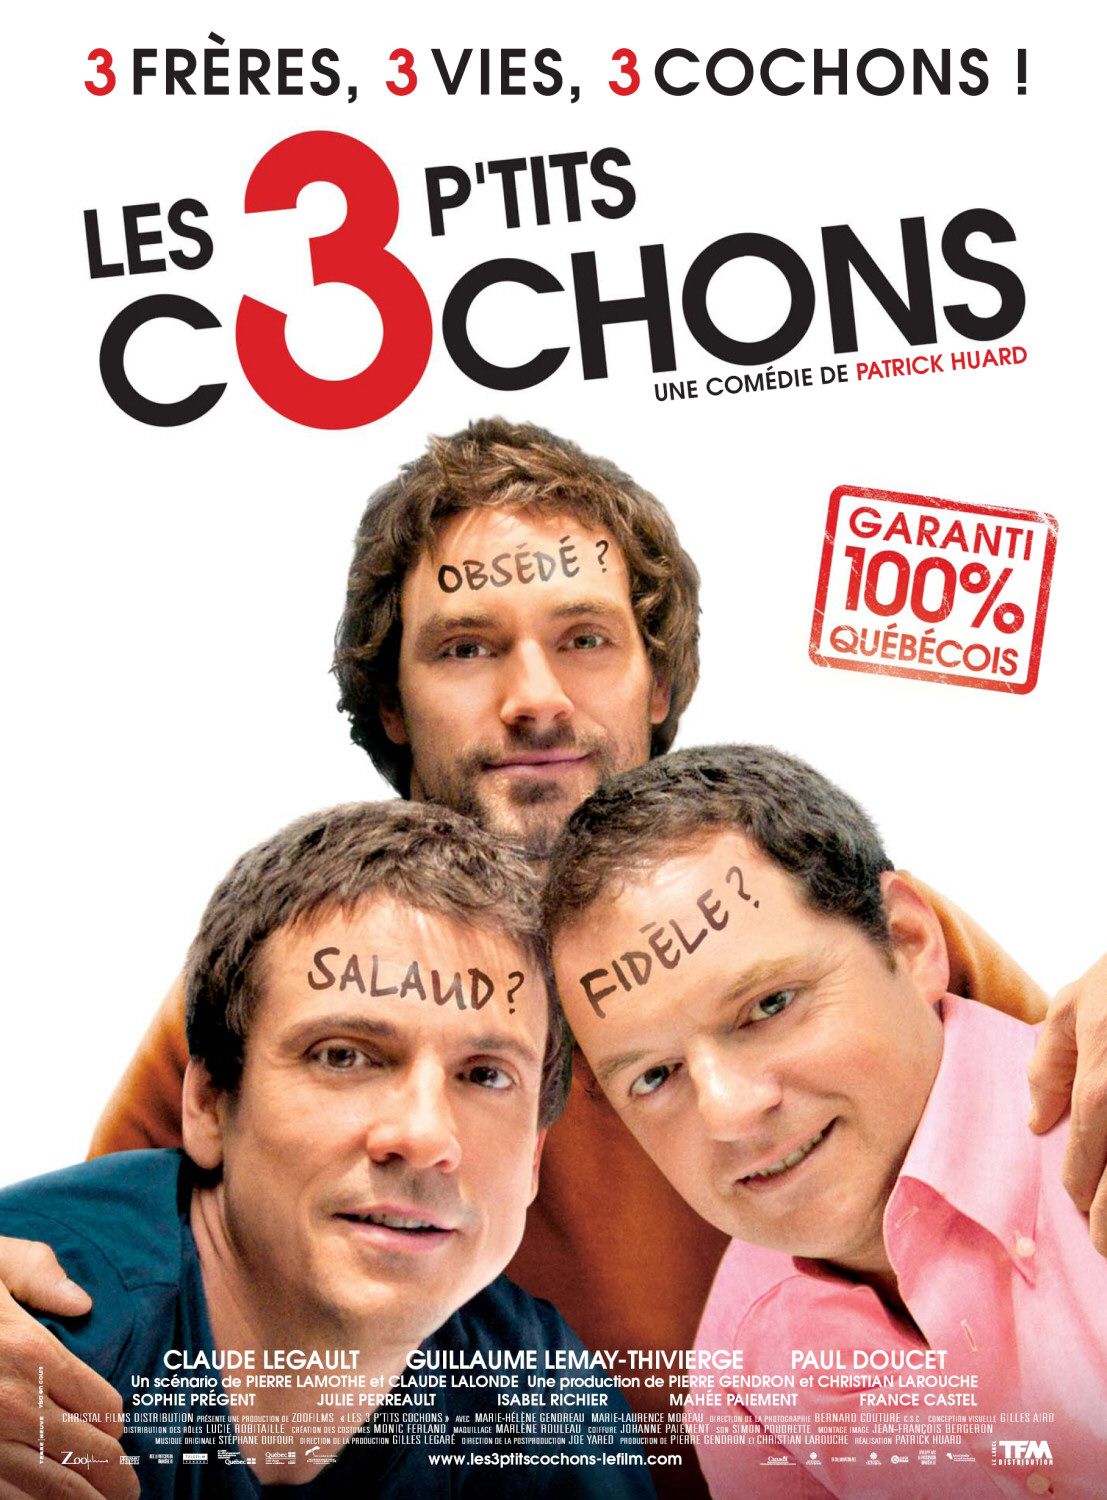 Extra Large Movie Poster Image for 3 p'tits cochons, Les (#2 of 2)